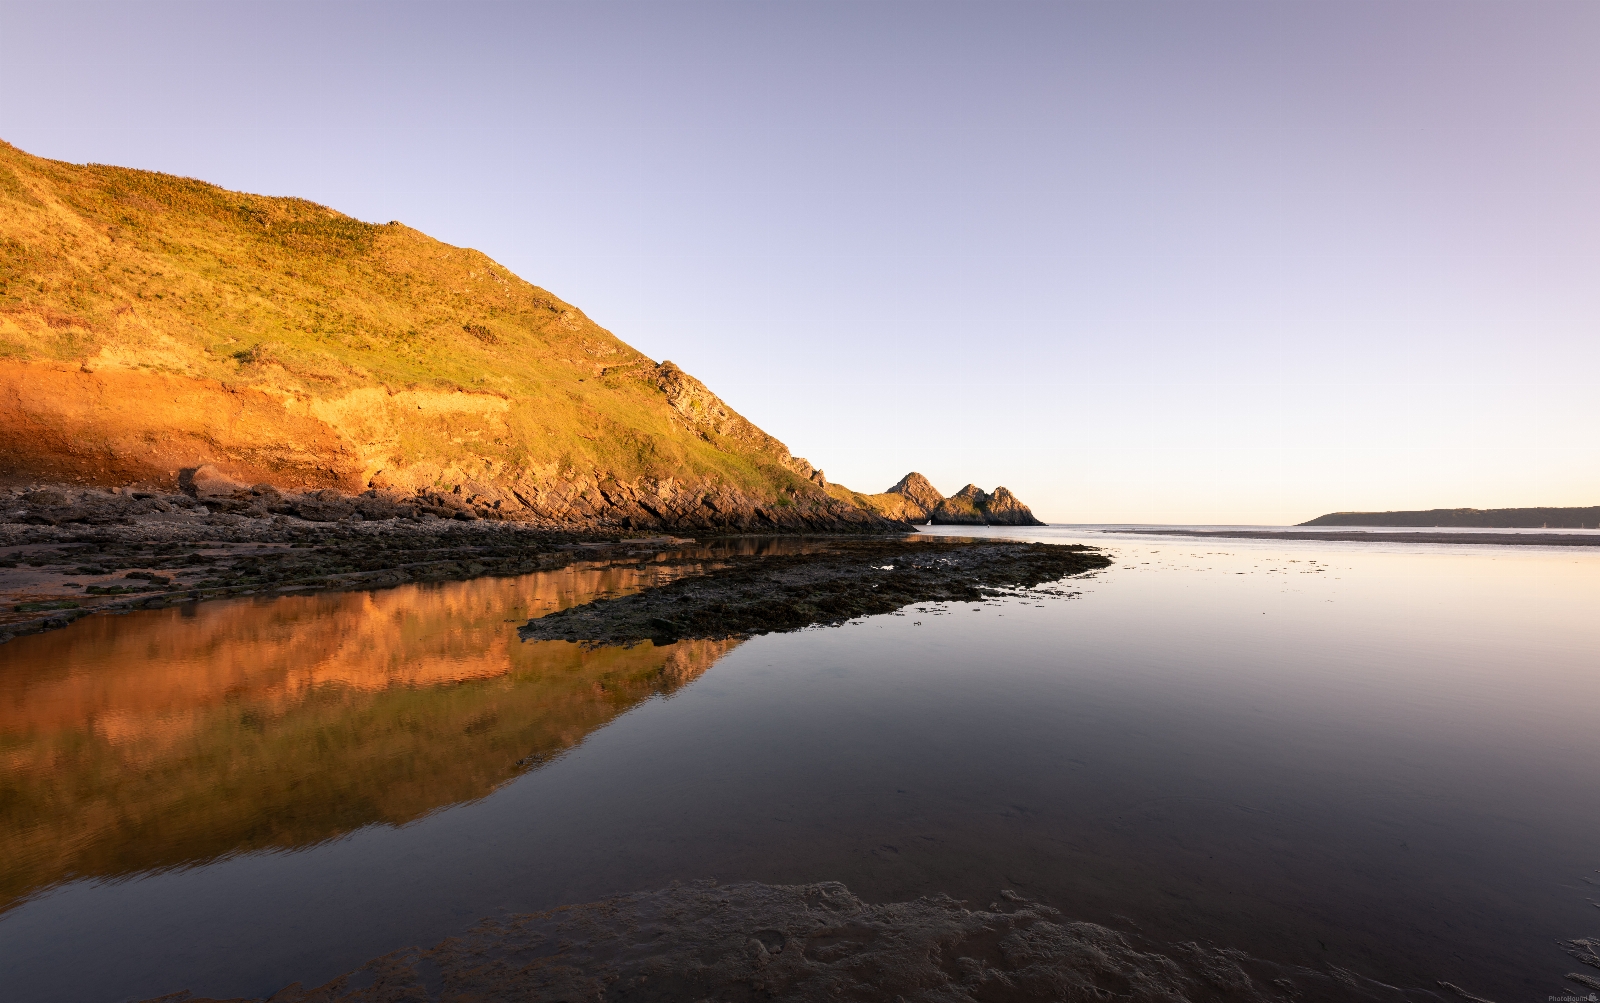 Image of Three Cliffs Bay by Alison Fairley